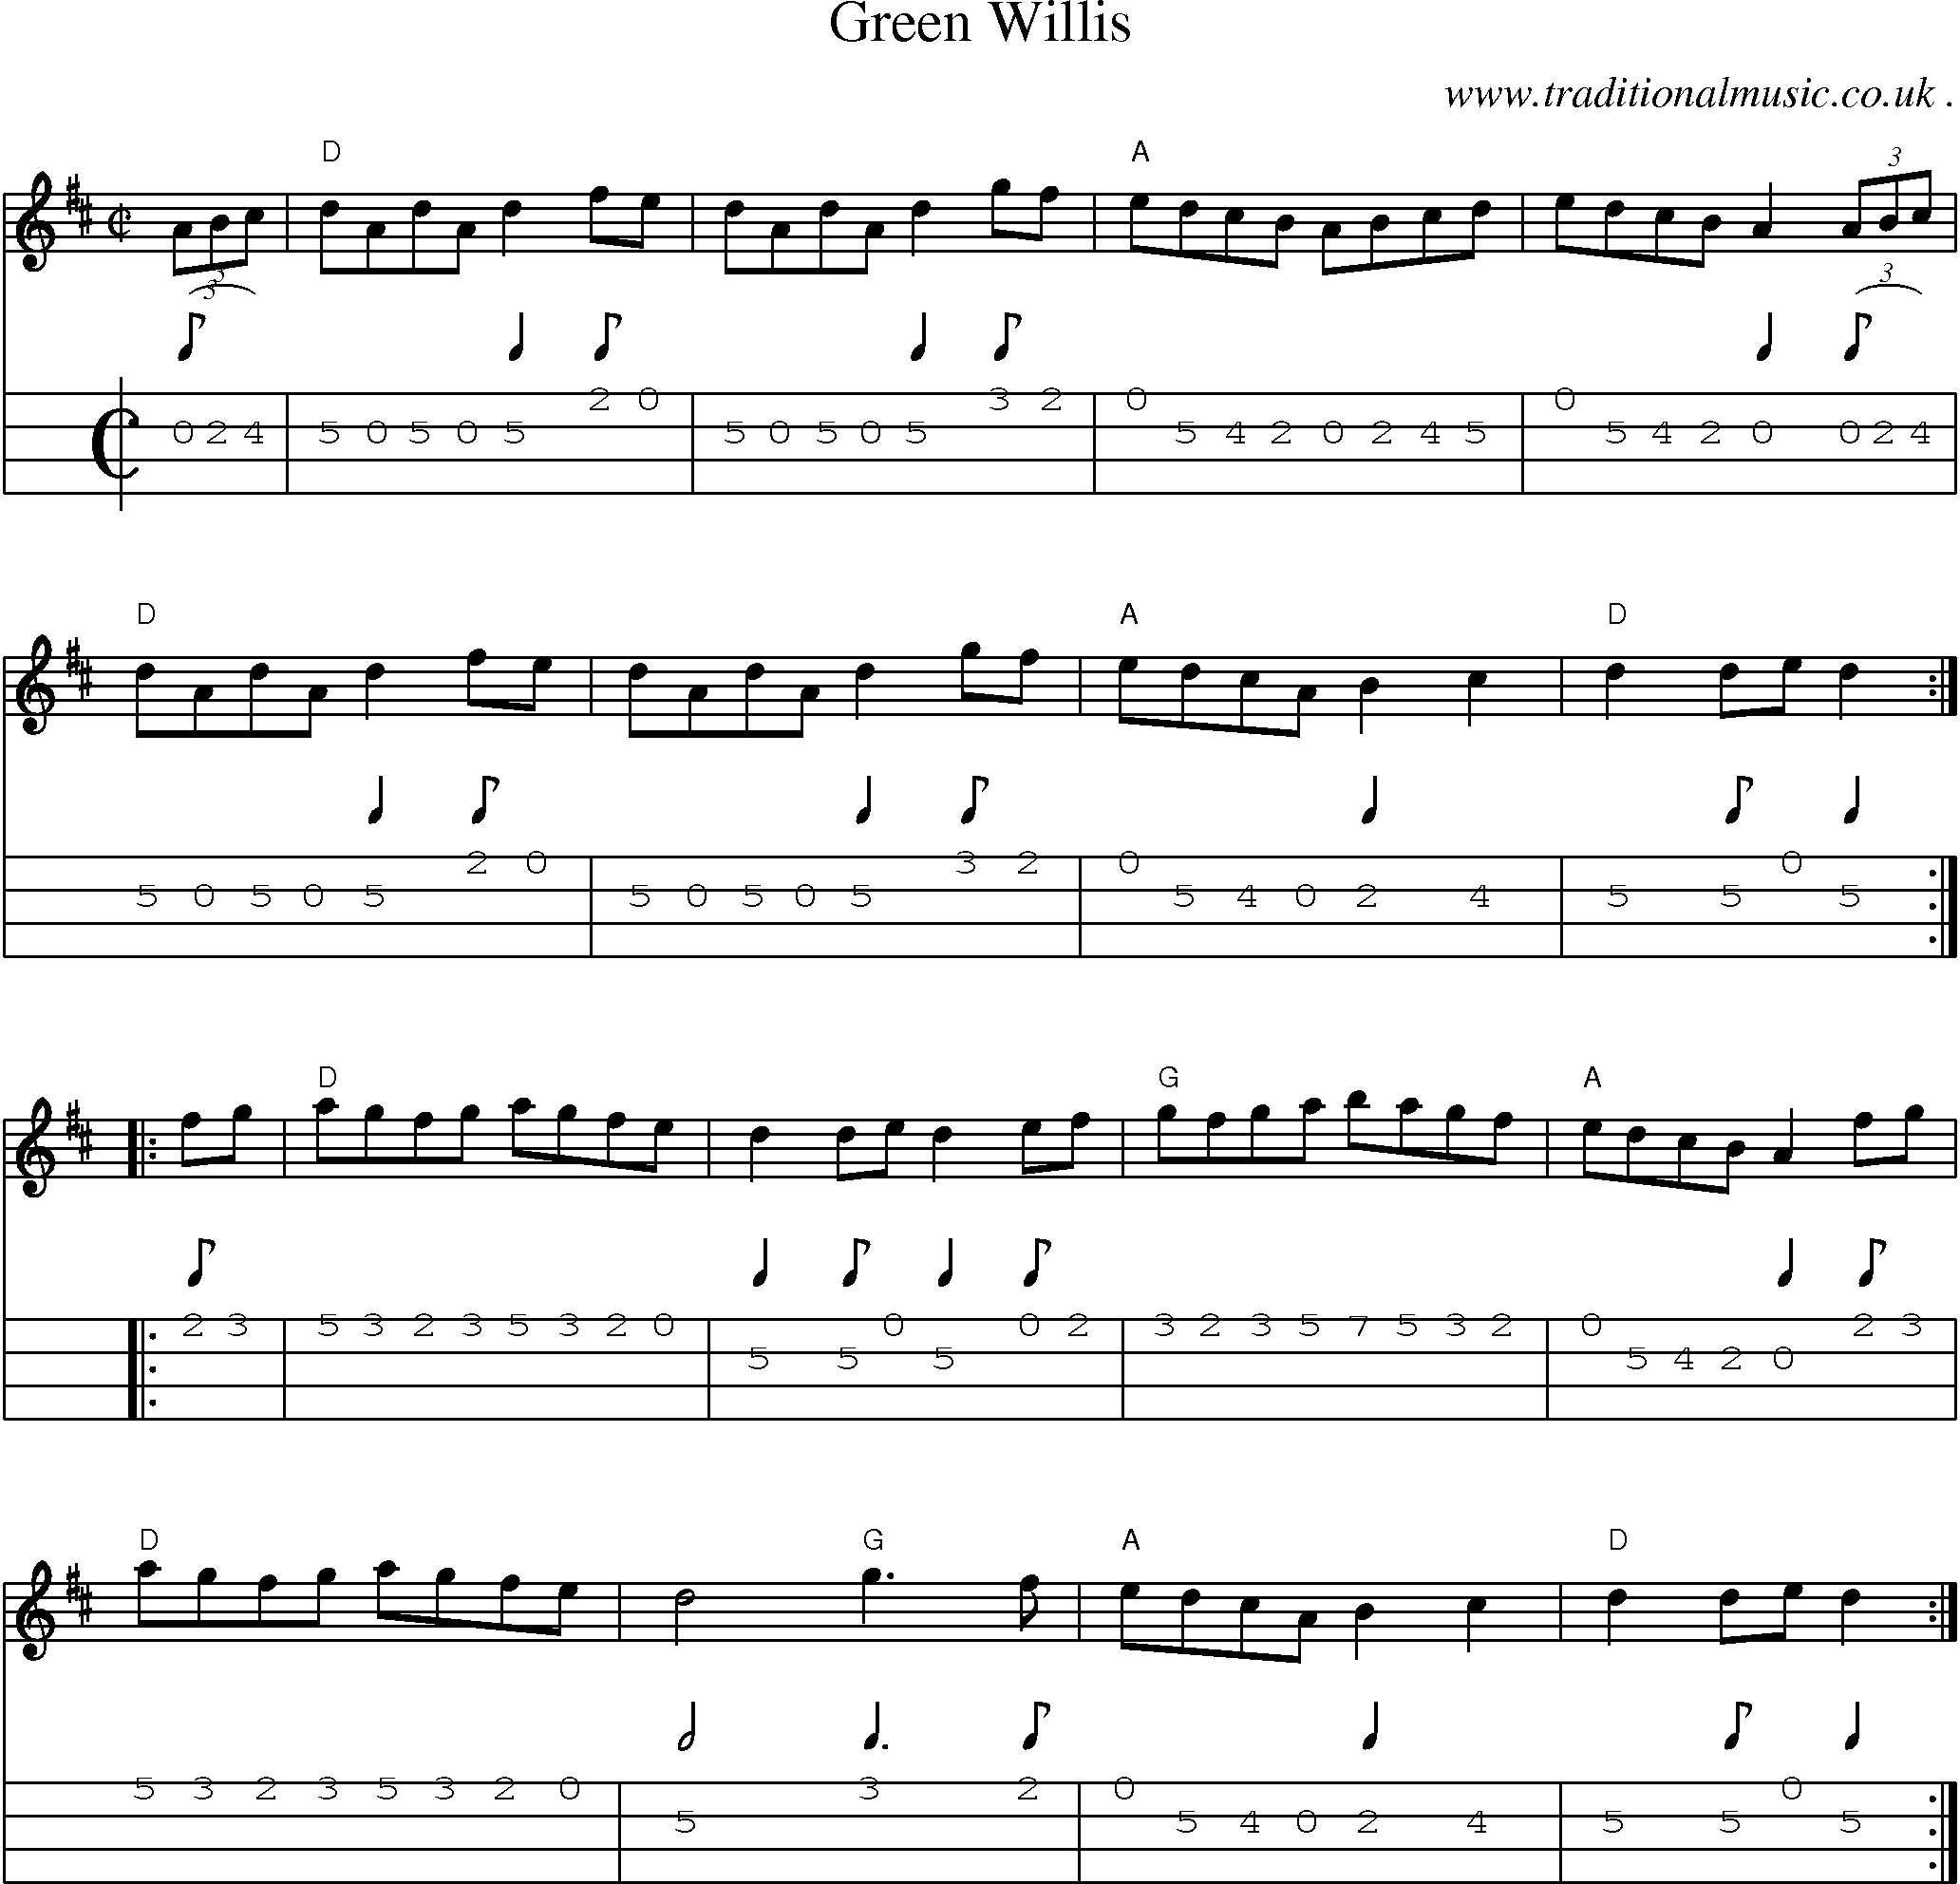 Music Score and Guitar Tabs for Green Willis